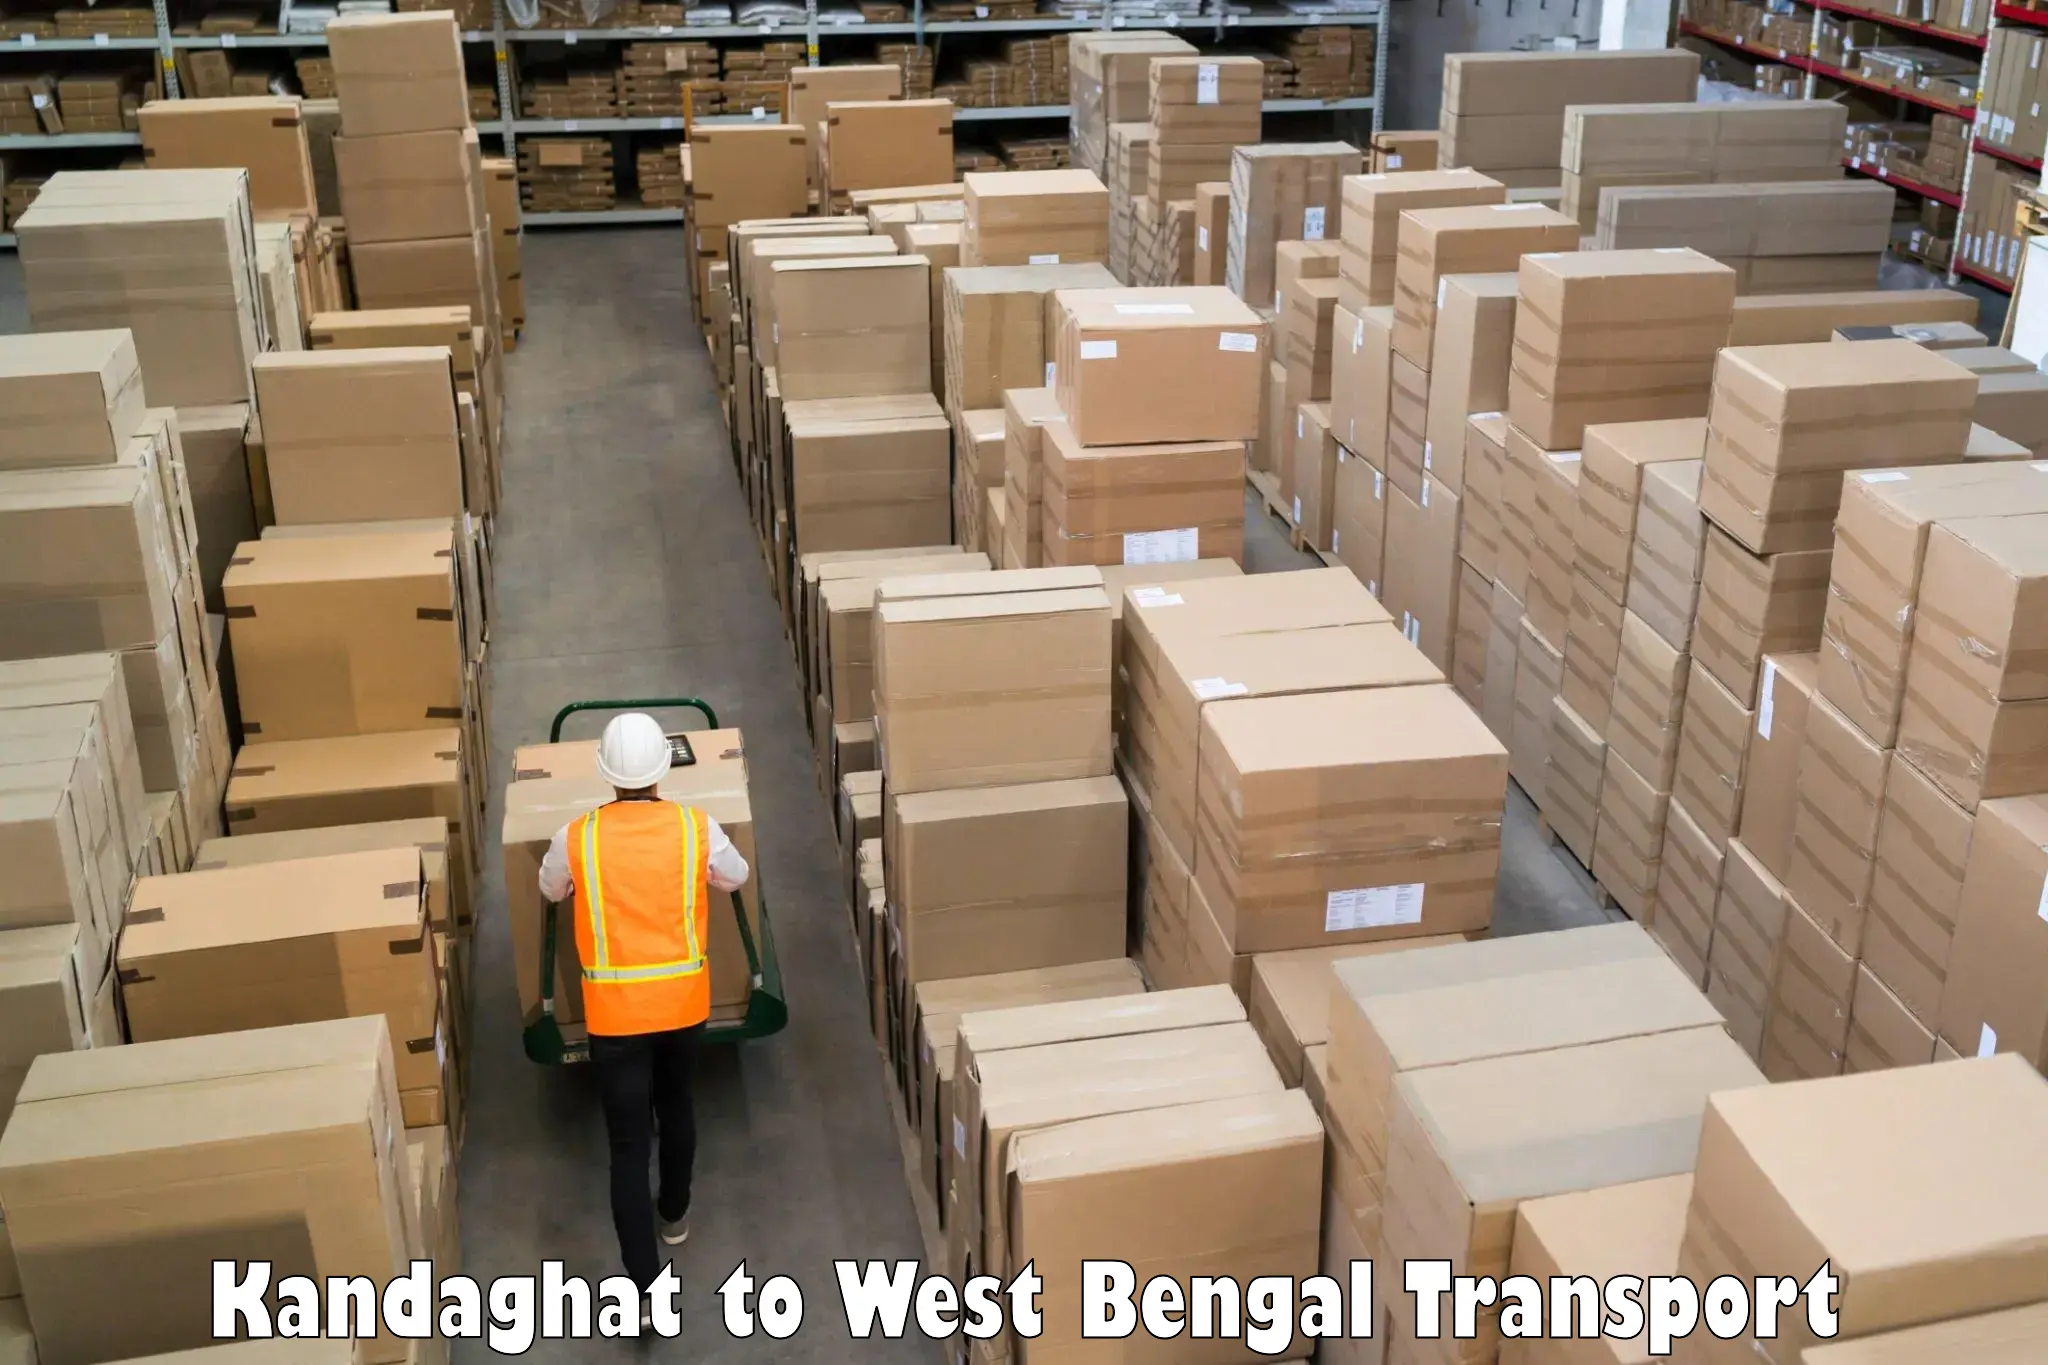 Nearby transport service Kandaghat to Ranaghat